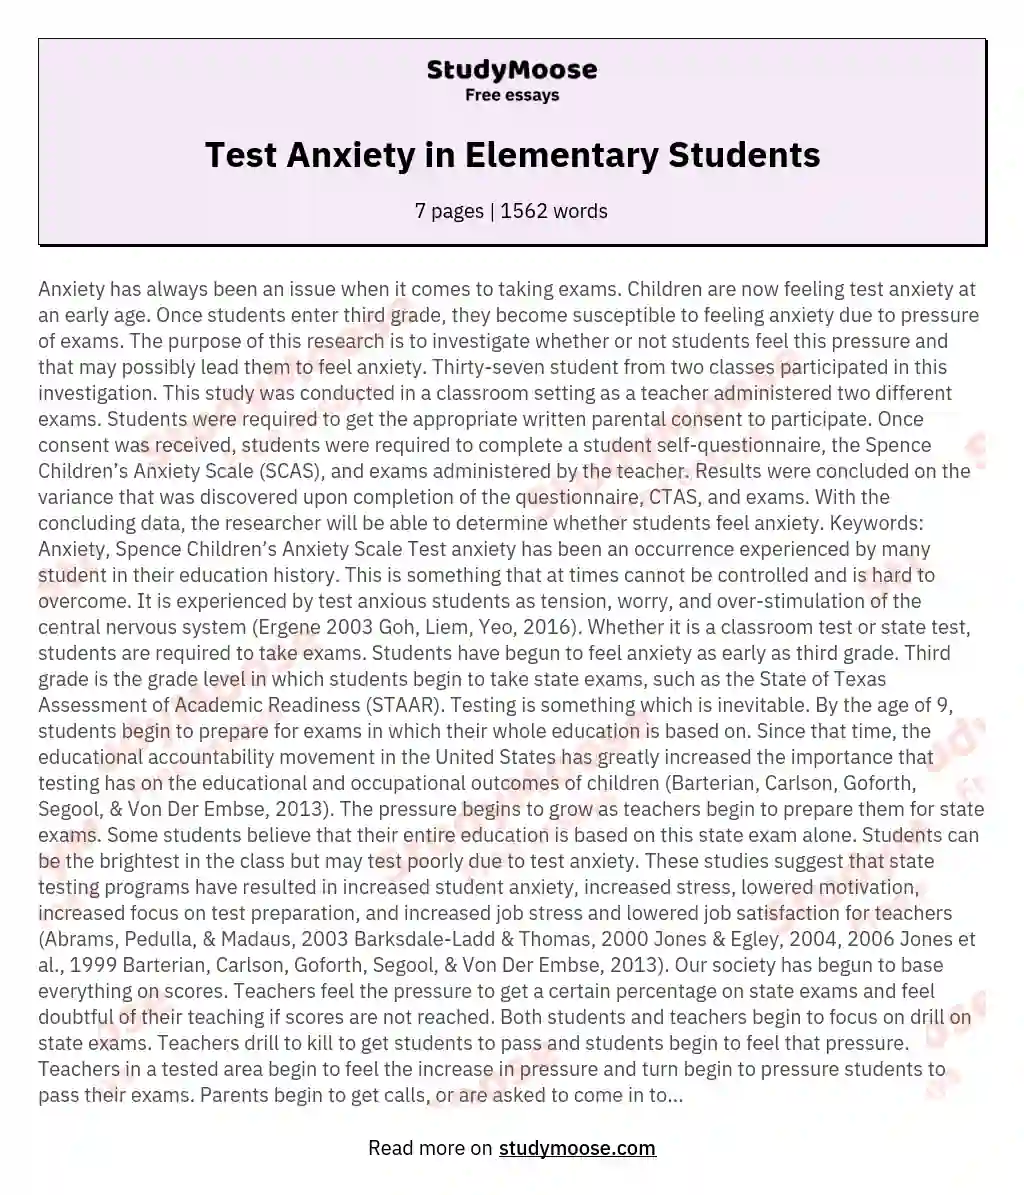 Test Anxiety in Elementary Students essay